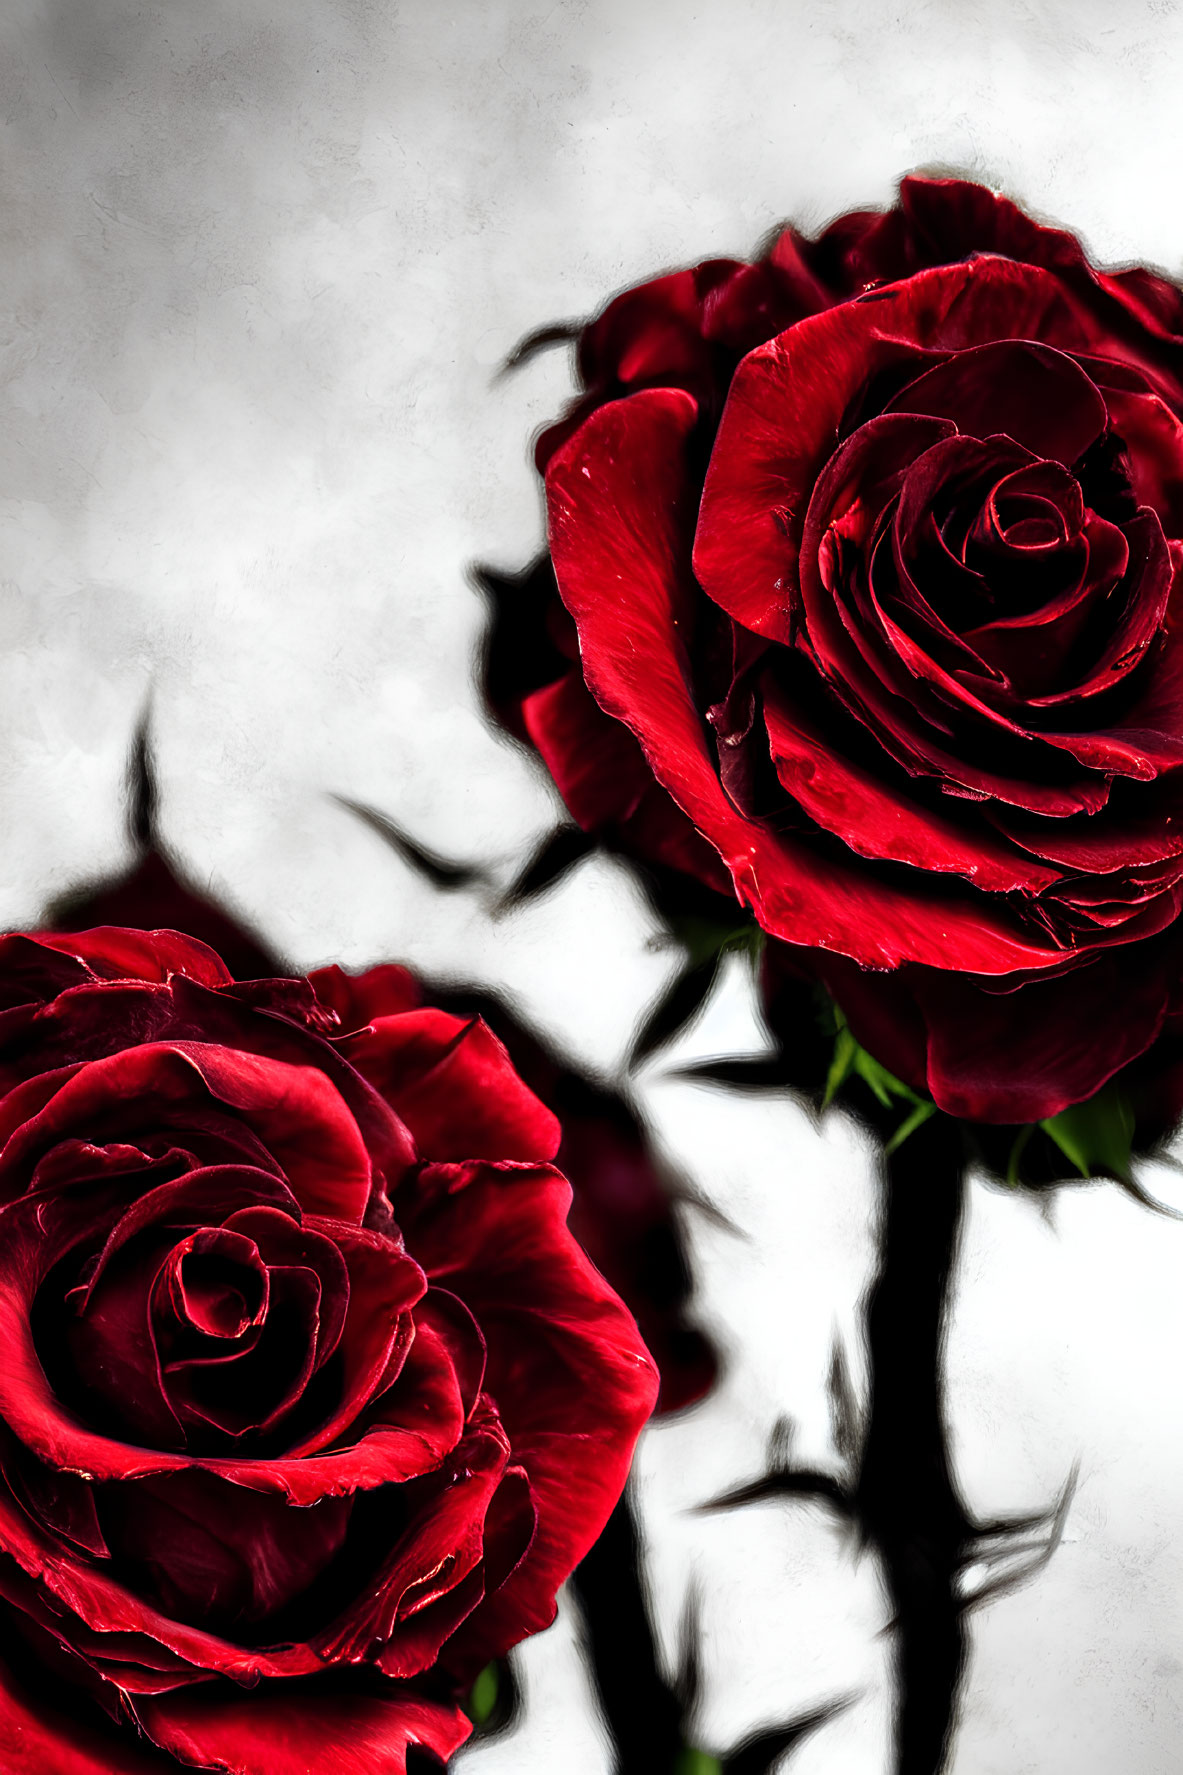 Vibrant red roses with petals and thorns on grey background